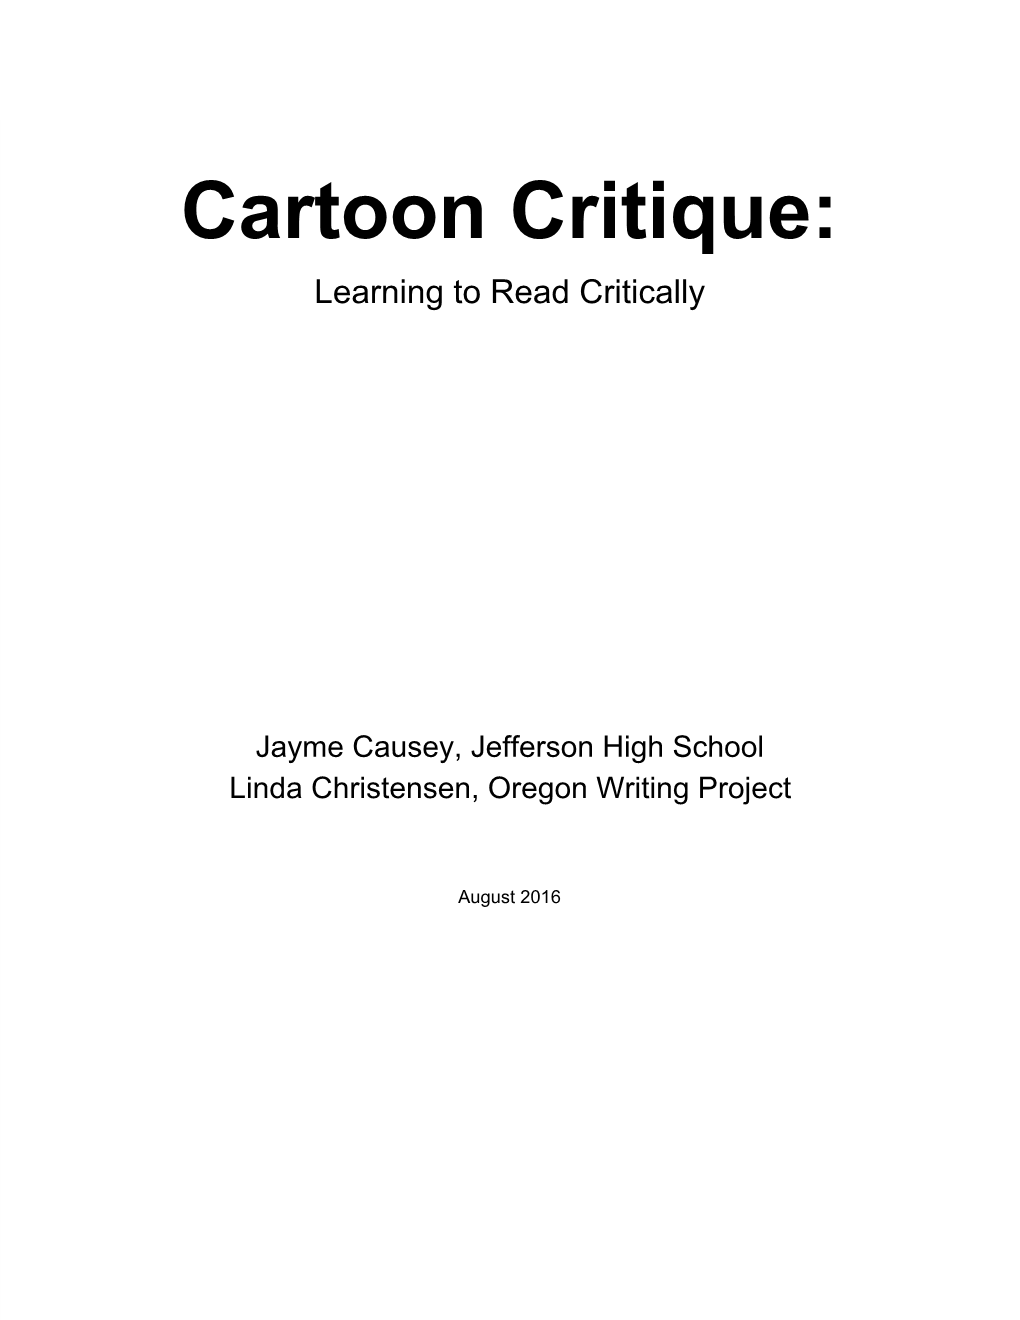 Cartoon Critique: Learning to Read Critically